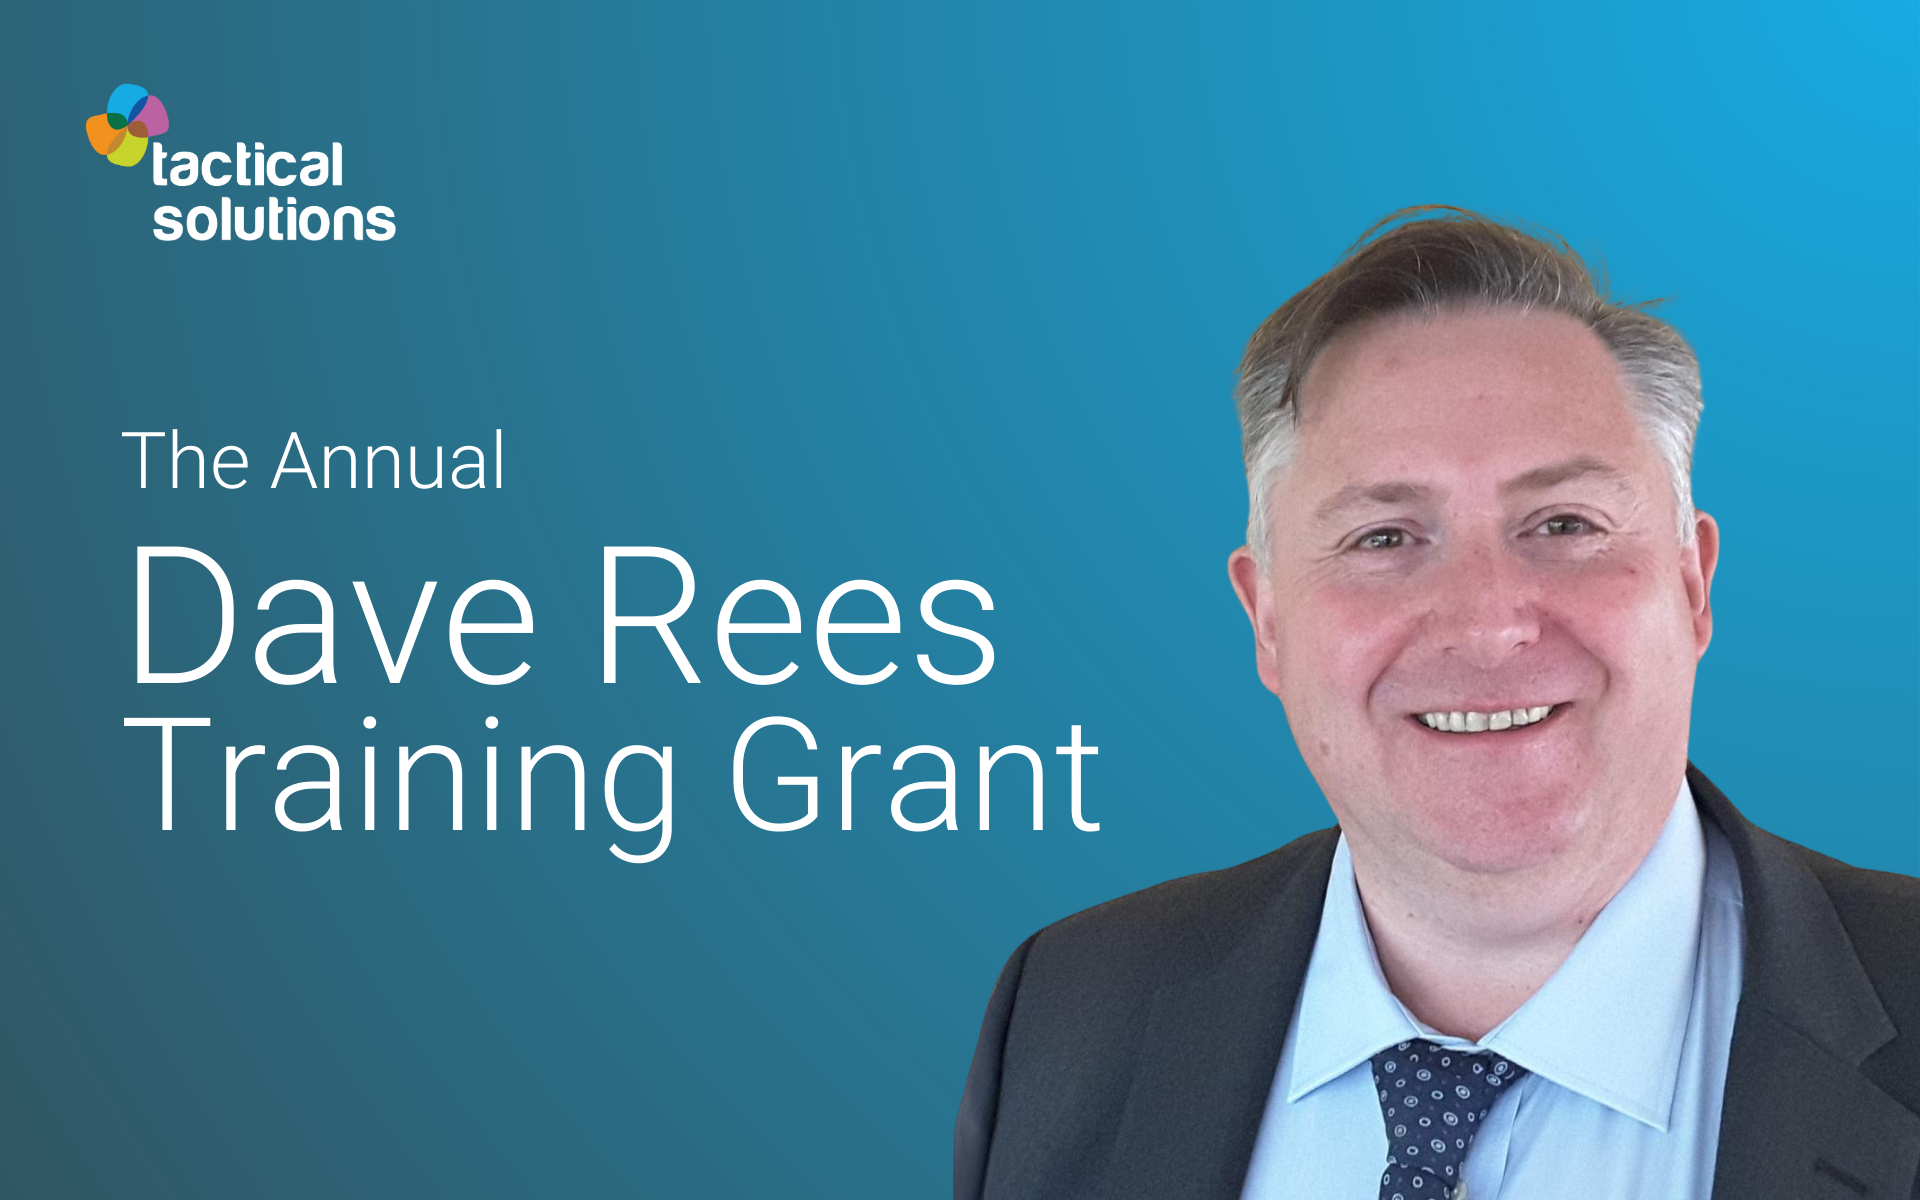 The Dave Rees Training Grant